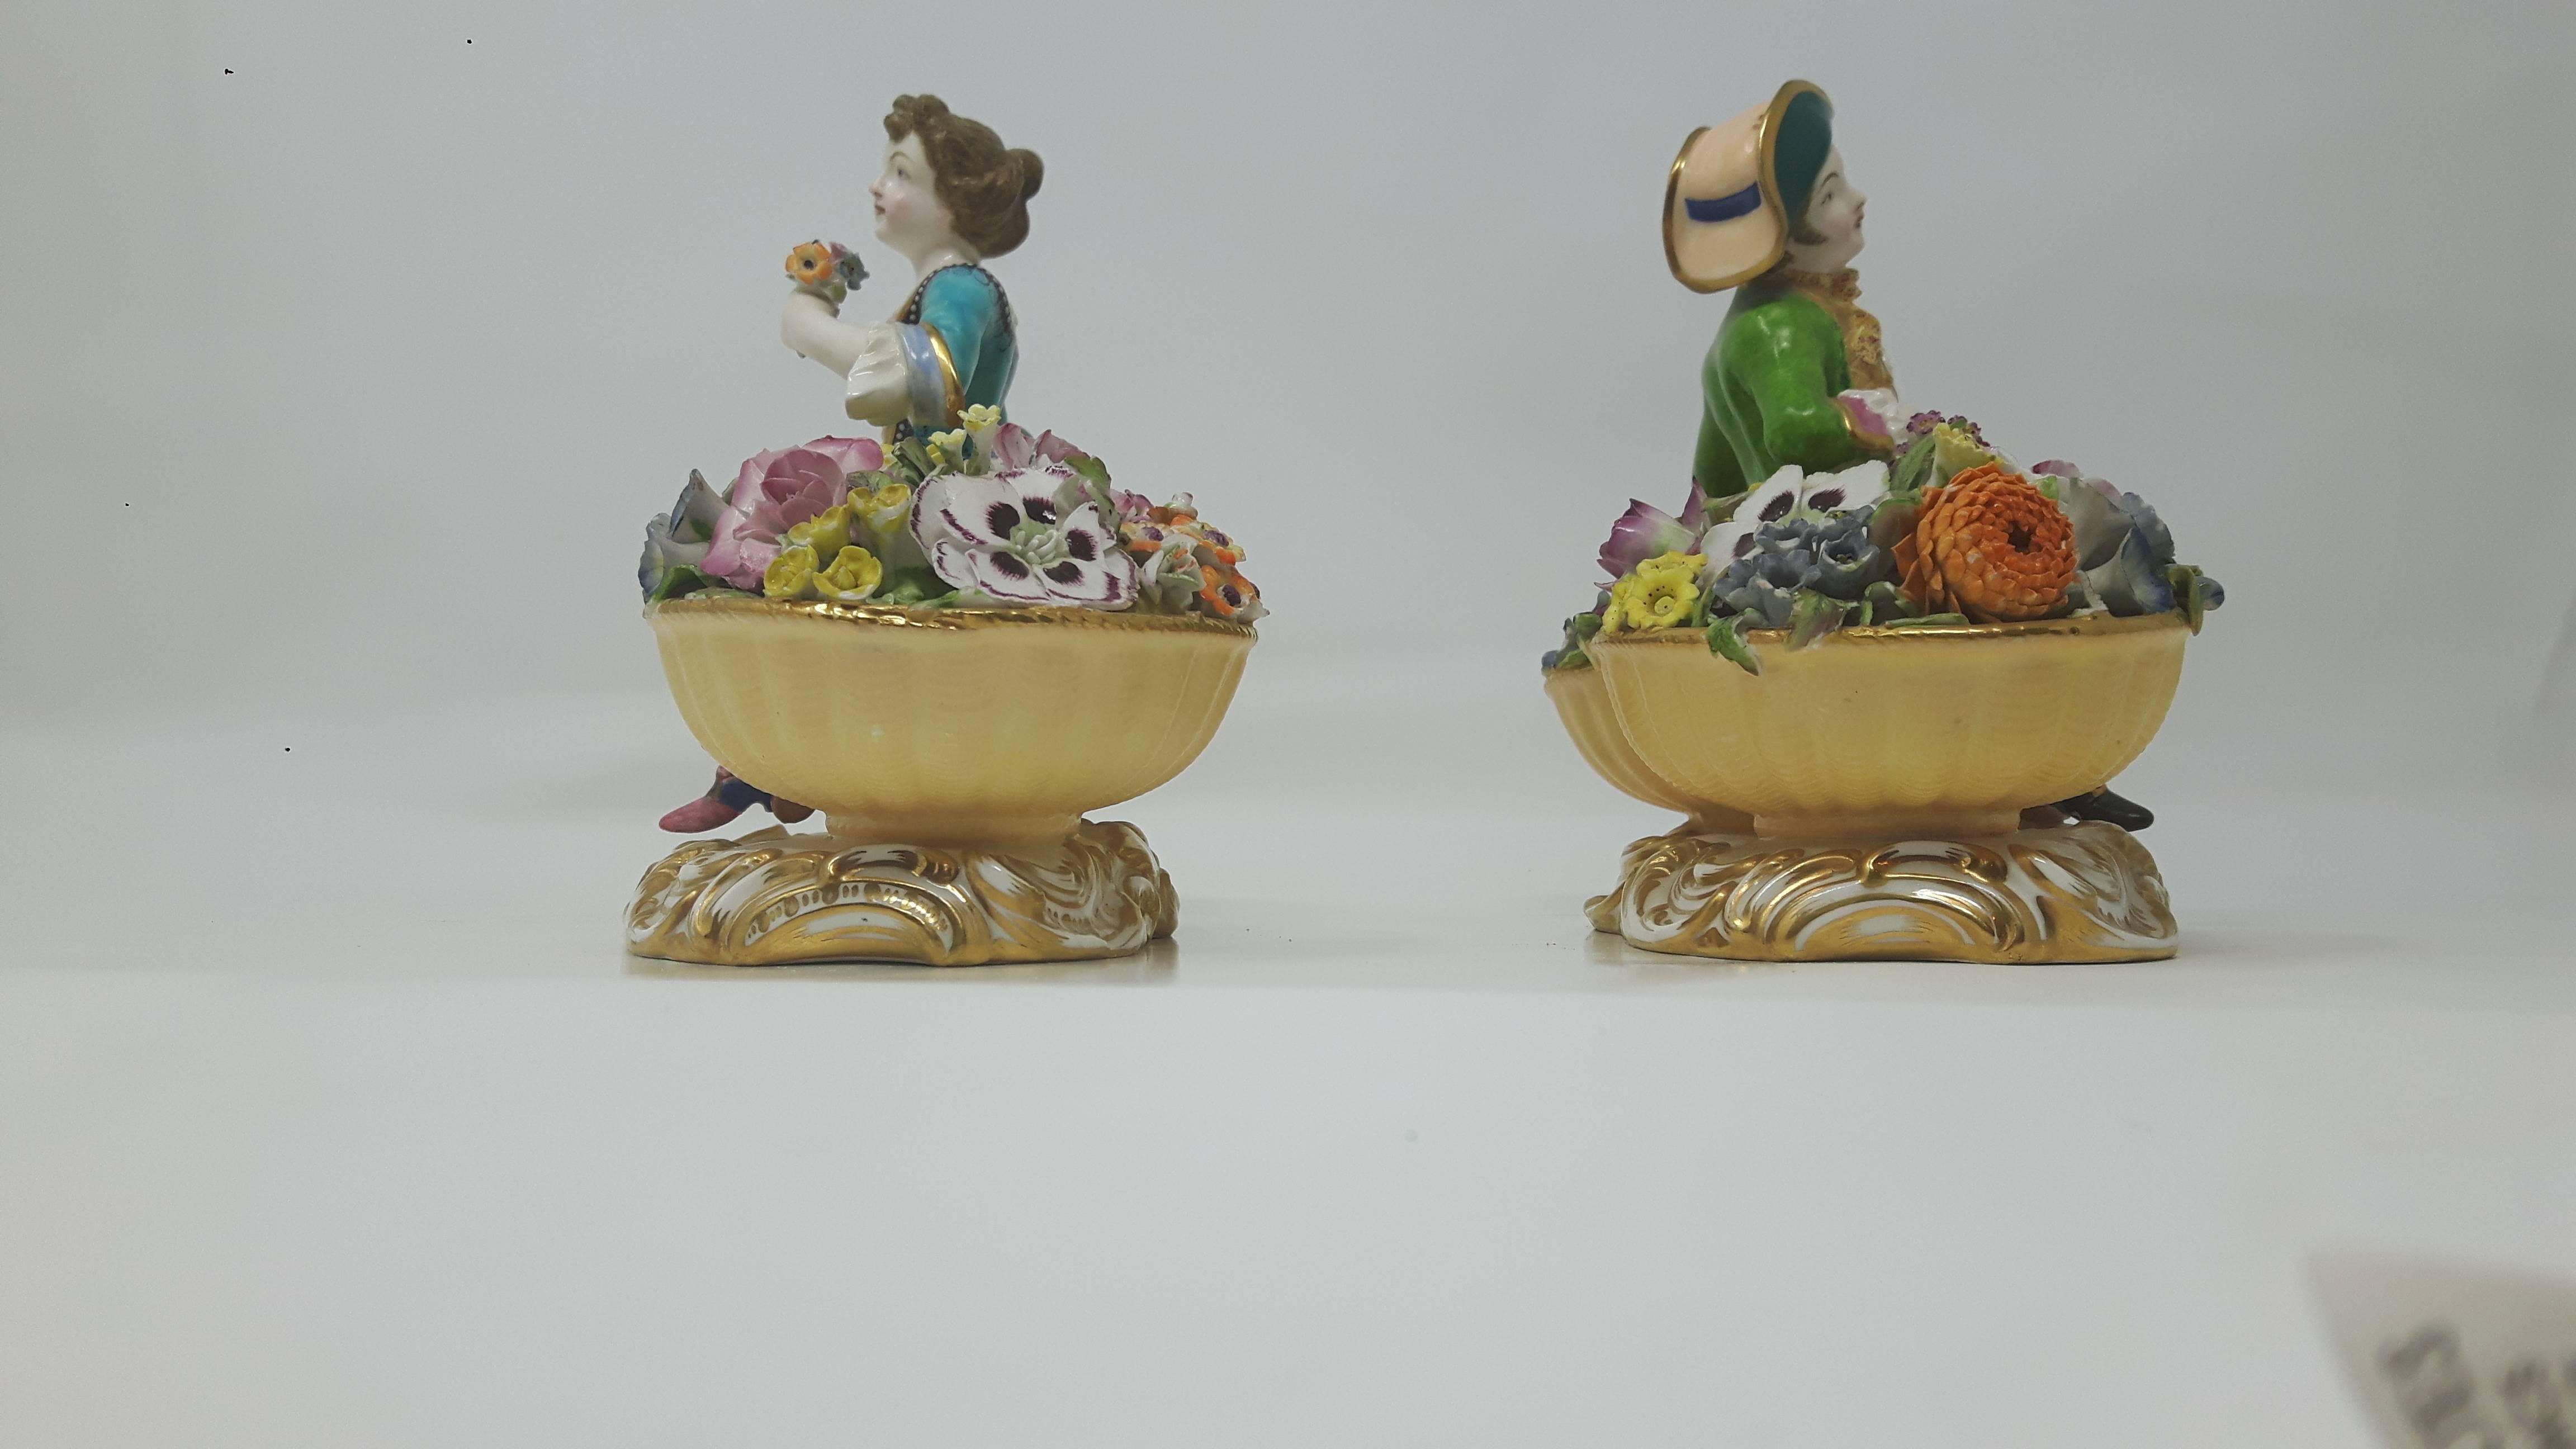 A pair of Minton figures of flowers sellers in the form of a youth and a girl in 18 century costume, each seated between two large baskets of very fine flowers, on gilt scrolled bases, model numbers 58 and 59 ,circa 1830-1840.